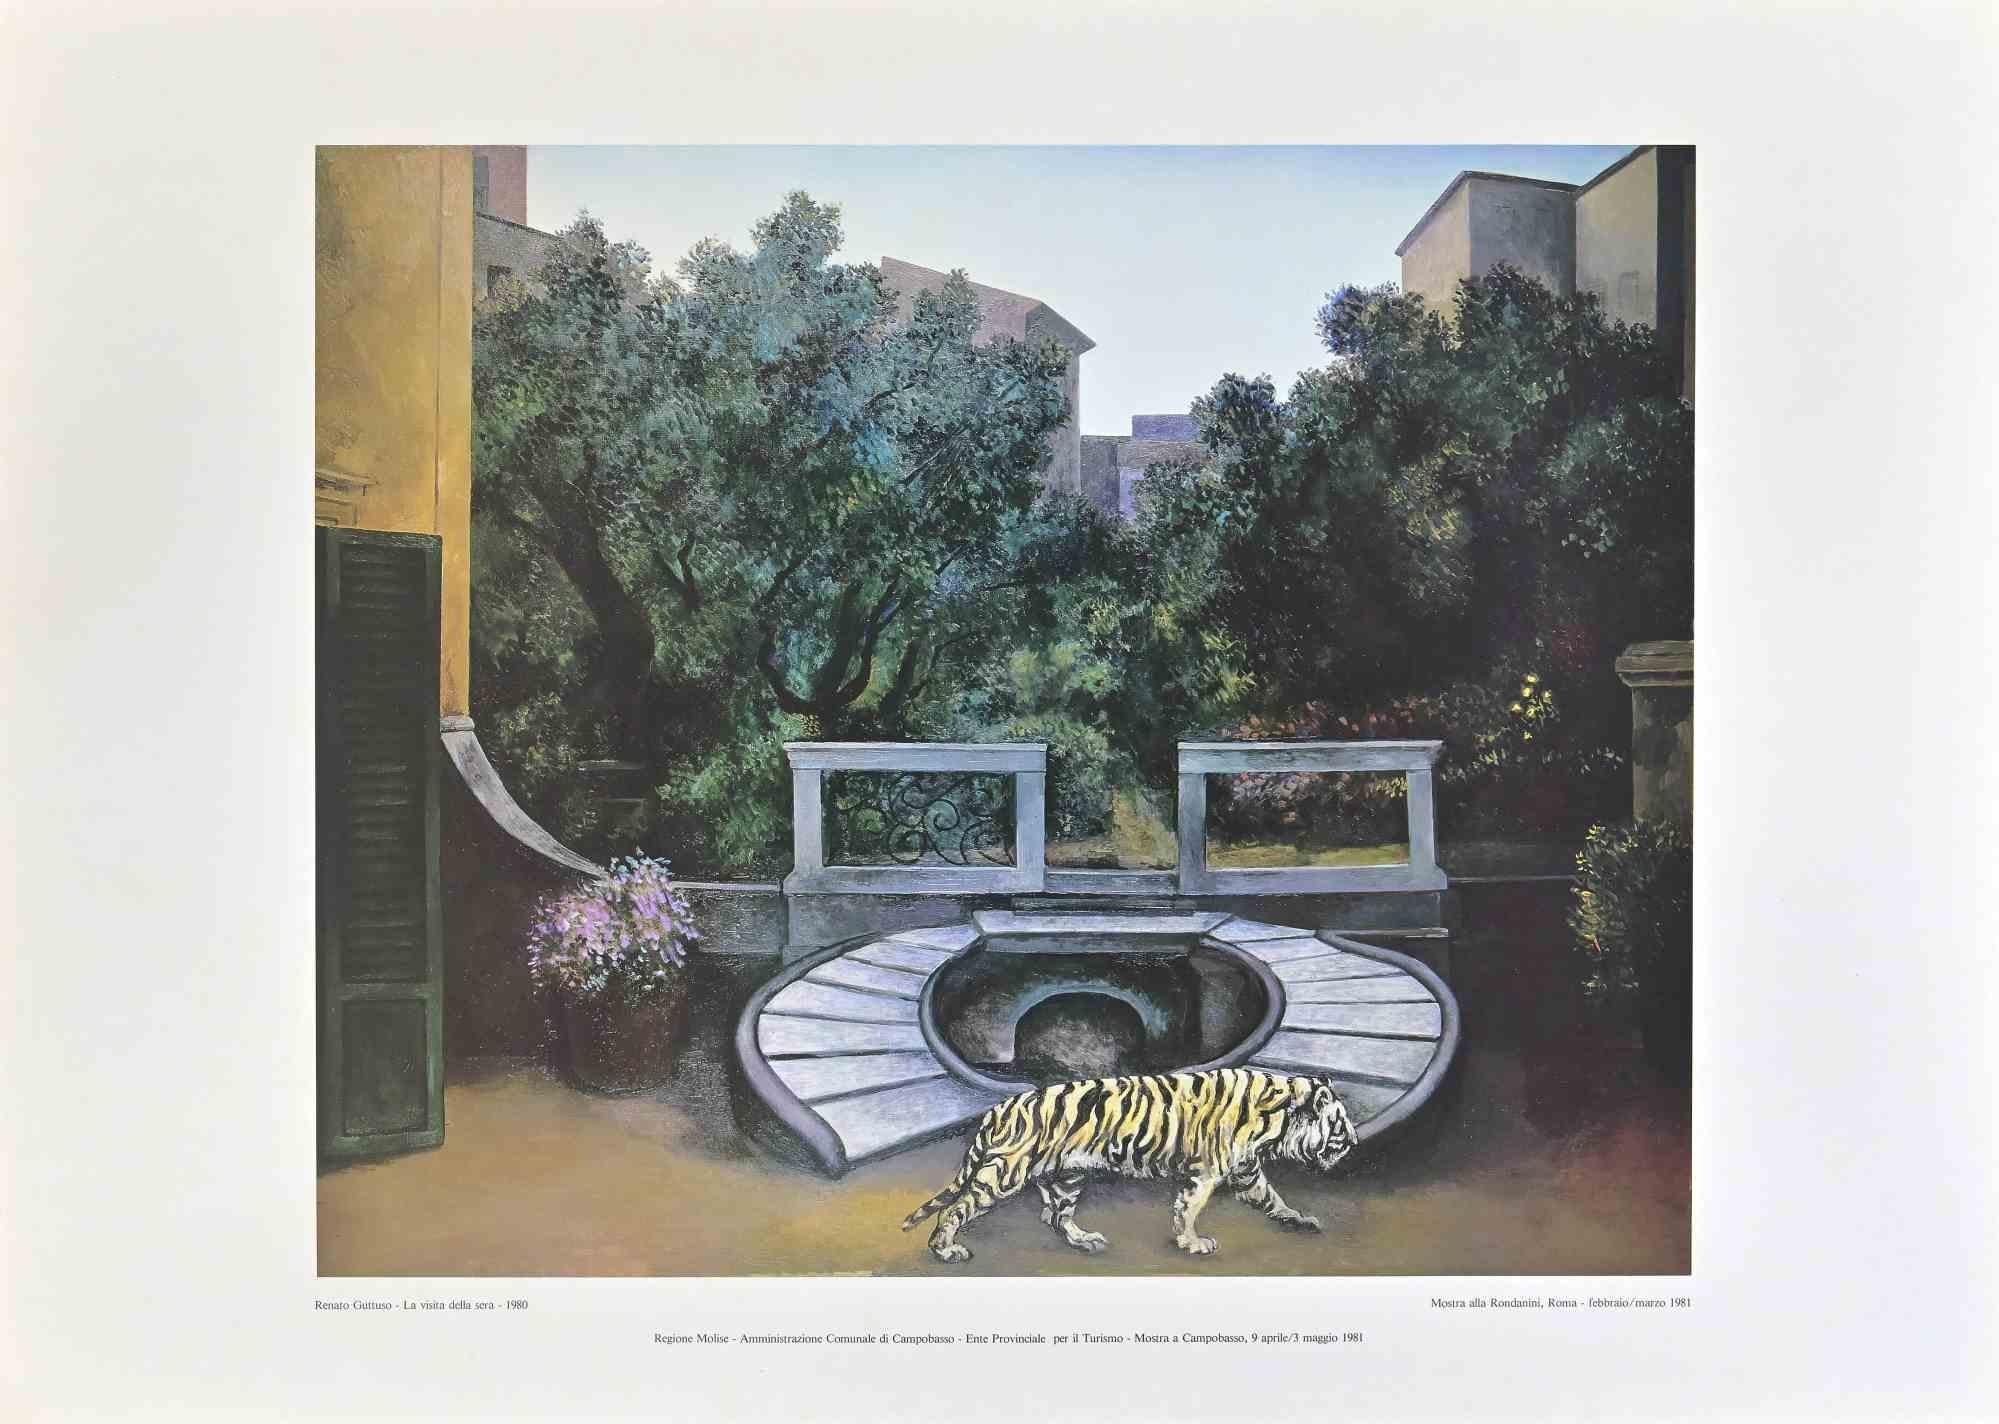 vintage poster realized by the Italian artist  Renato Guttuso  (Bagheria, 1911 – Rome, 1987) in  1981

Original Colored Offset on paper. 

The artwork was realized on the occasion of the exhibition realized in 1981 at Galleria Rondanini in Rome.
